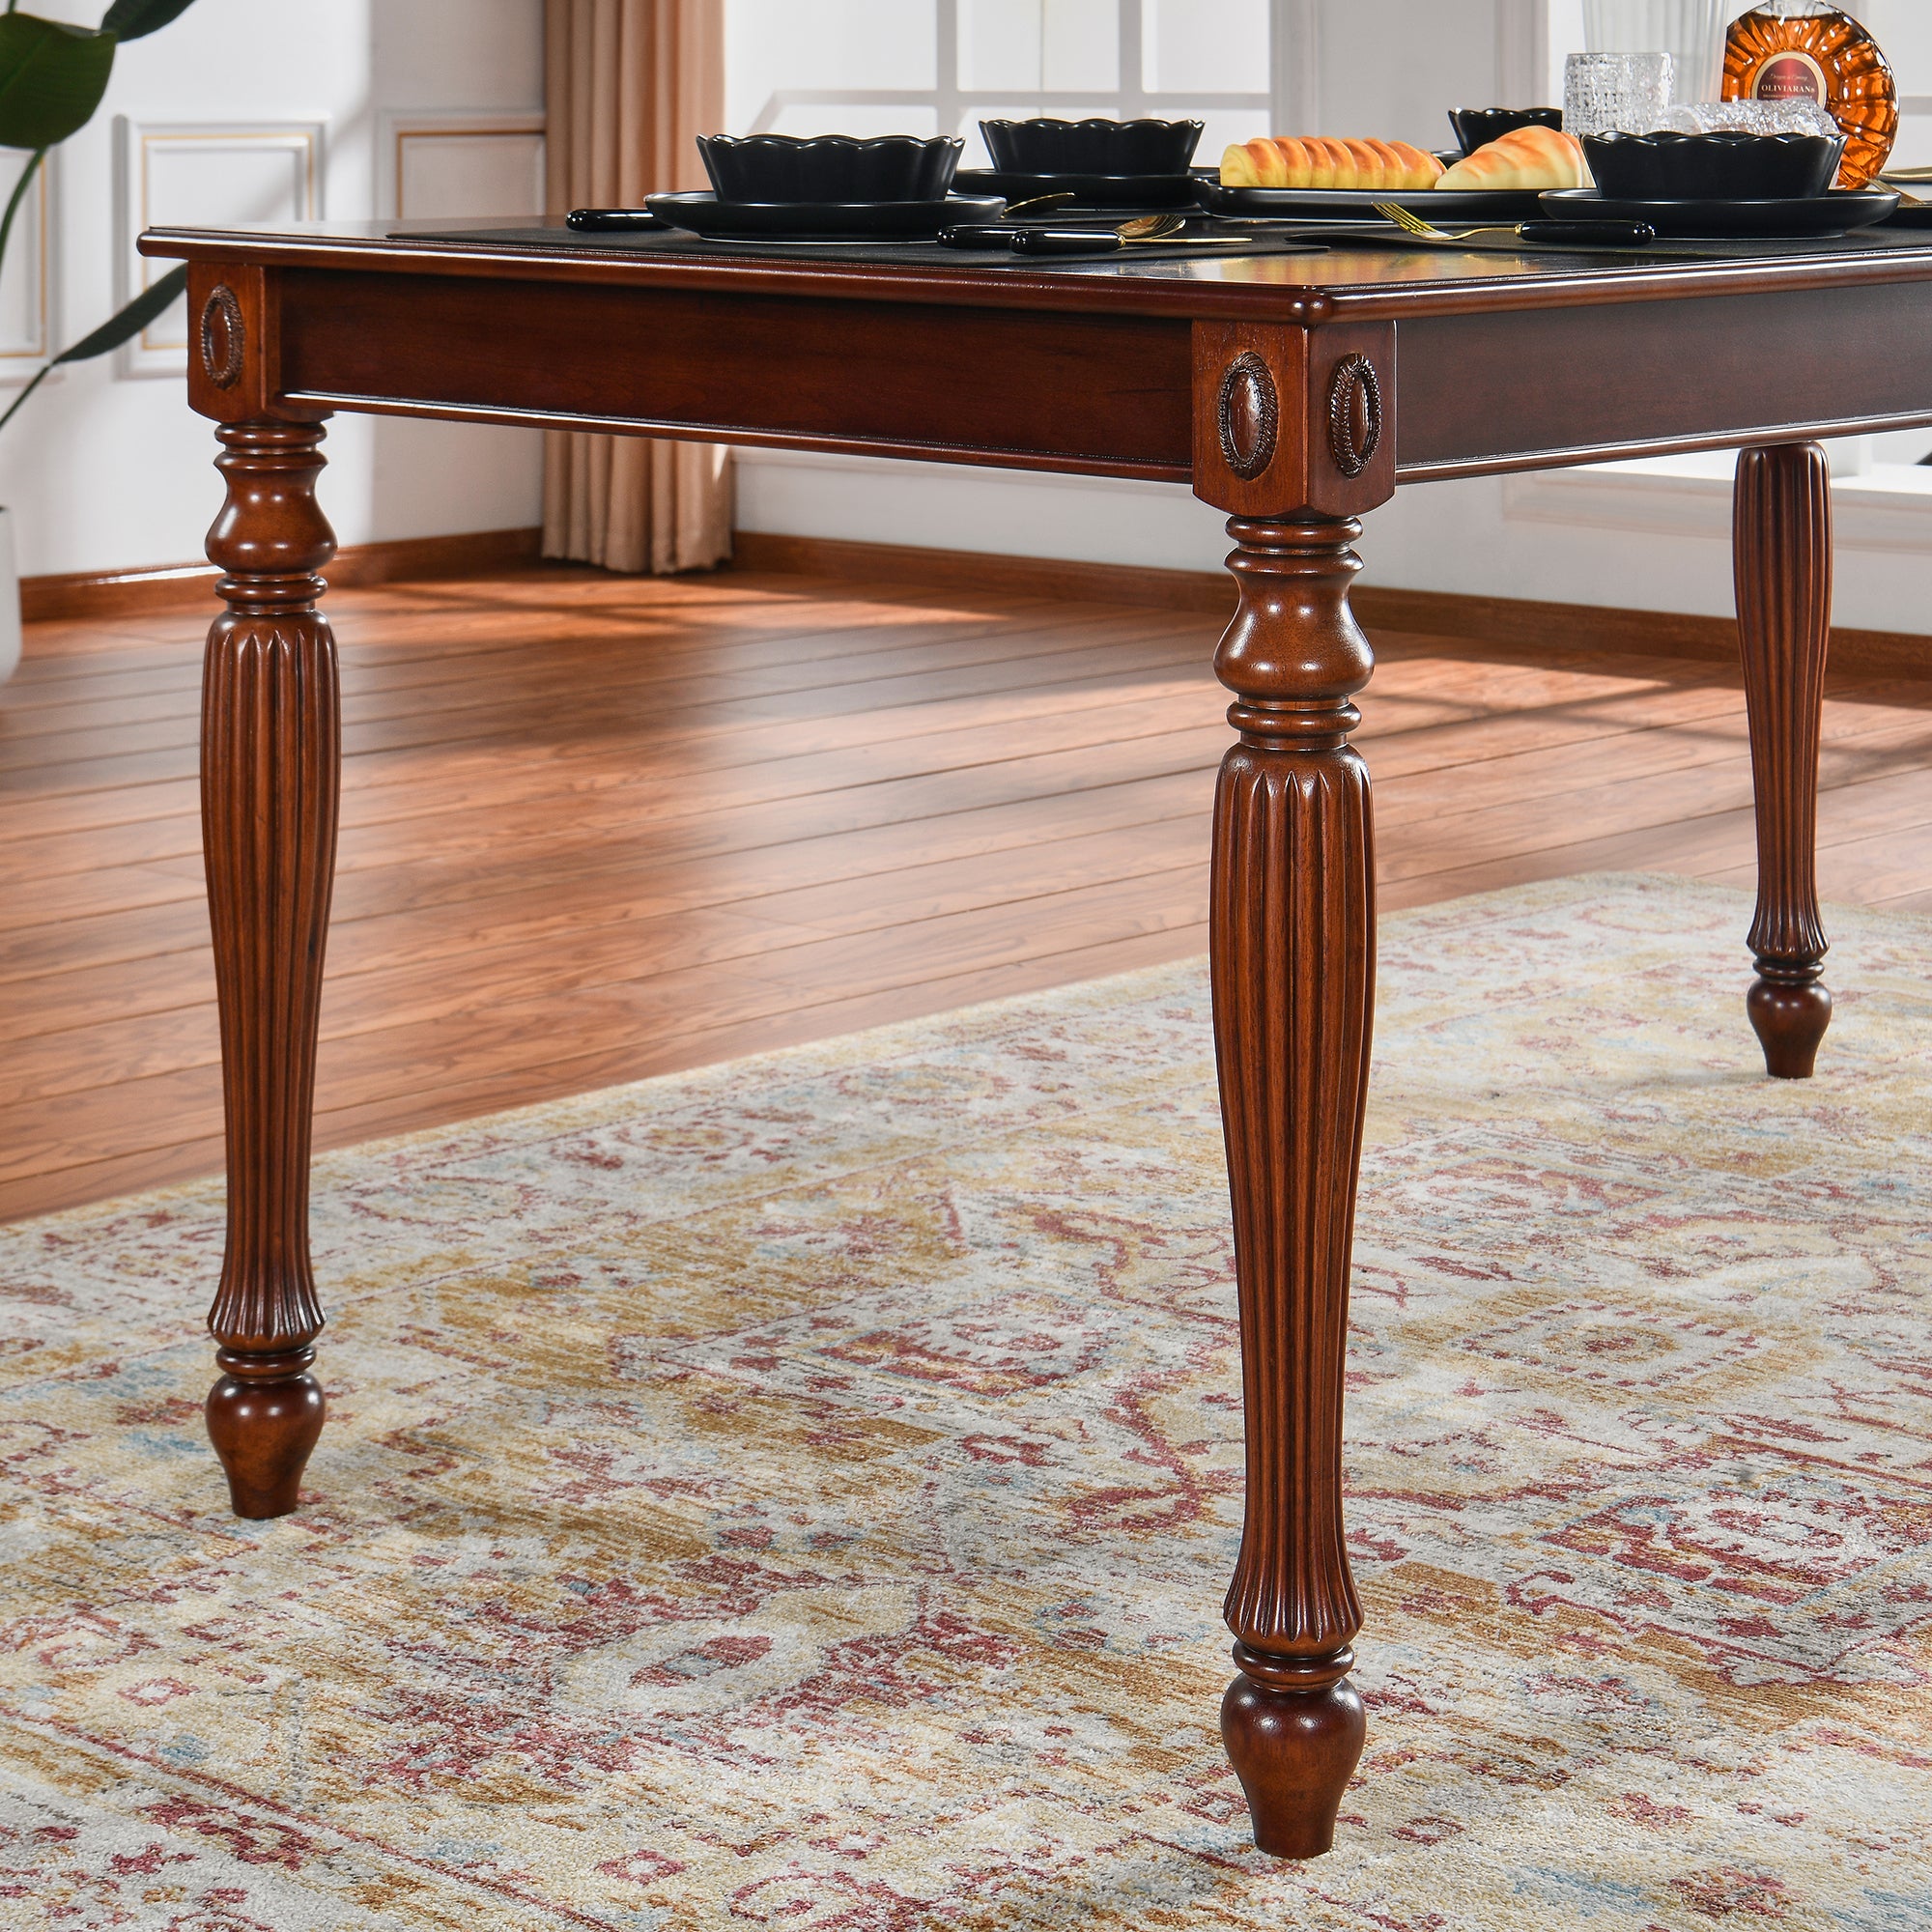 67.3" Dining Room Kitchen Table for 6 People